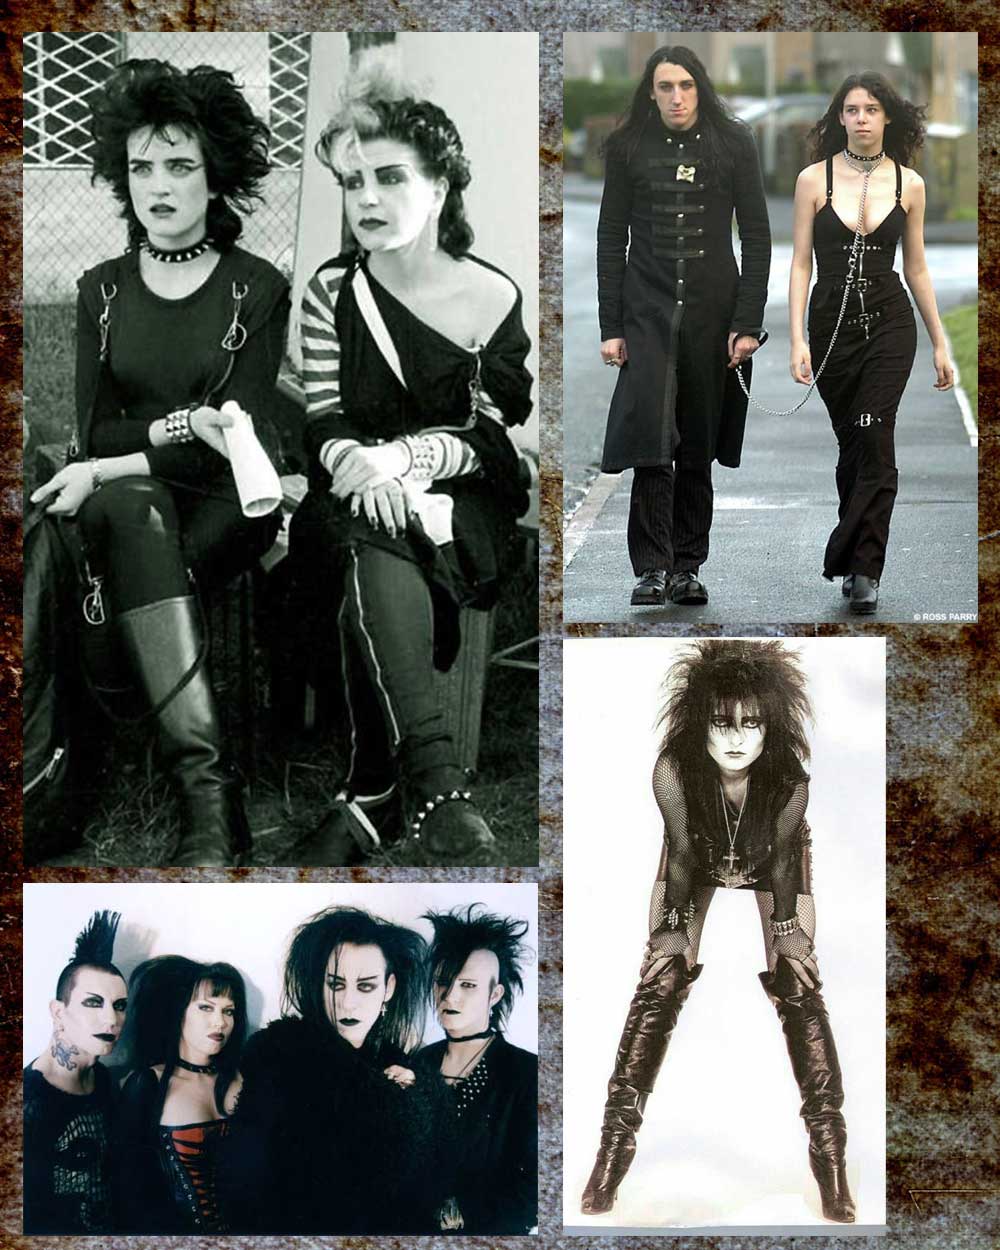 1970 and 1980s goth style